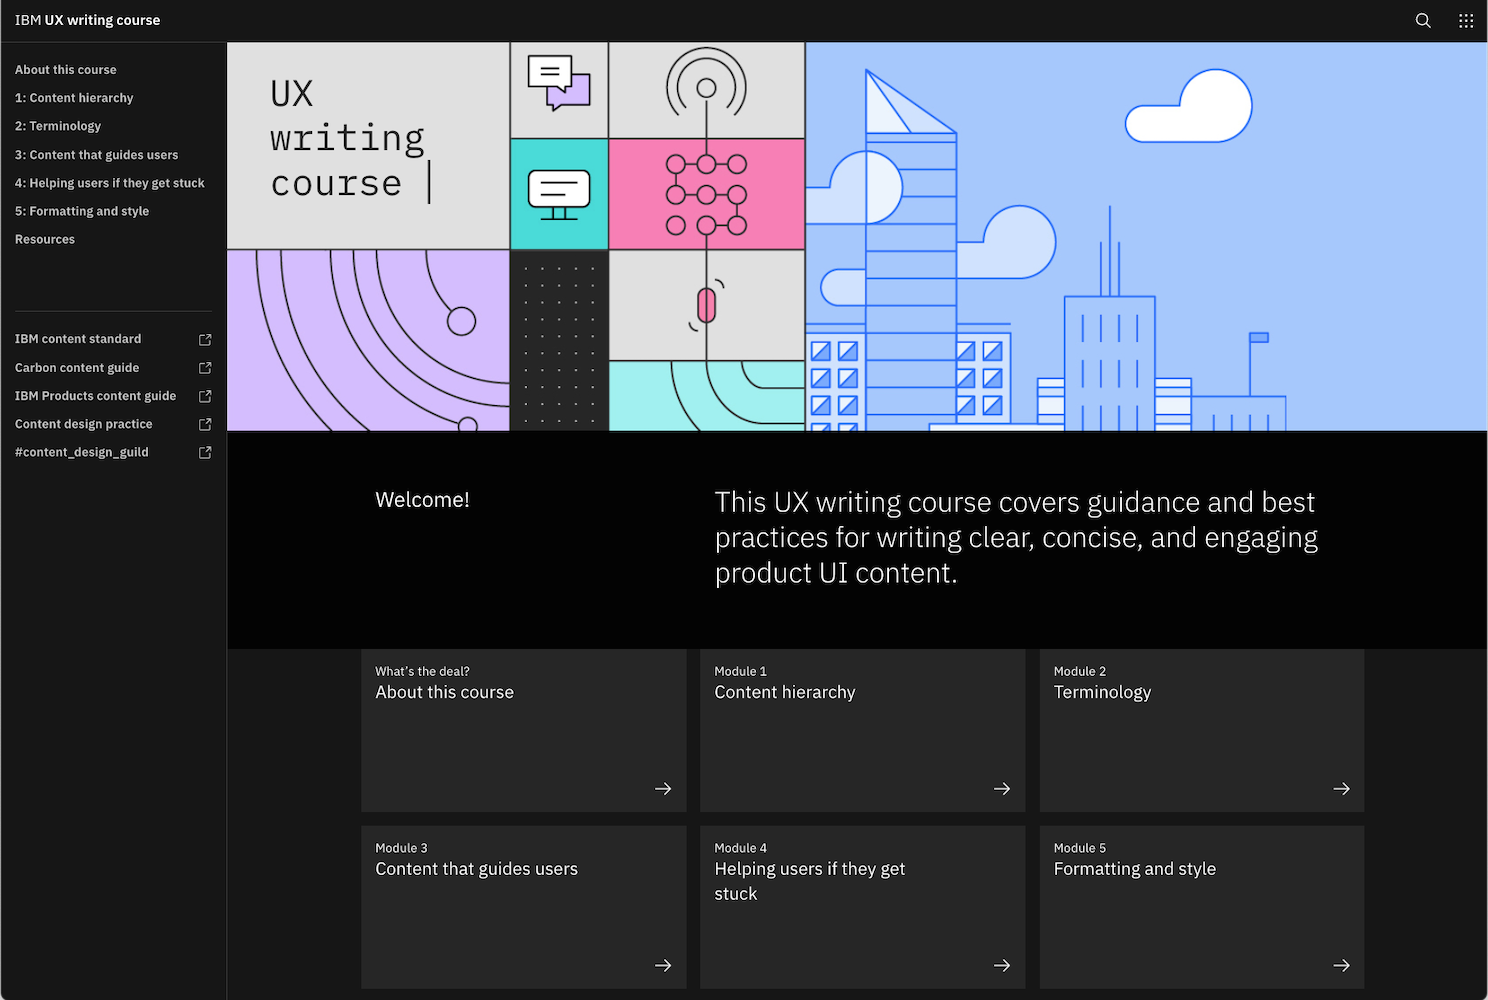 Screenshot of the IBM UX writing course